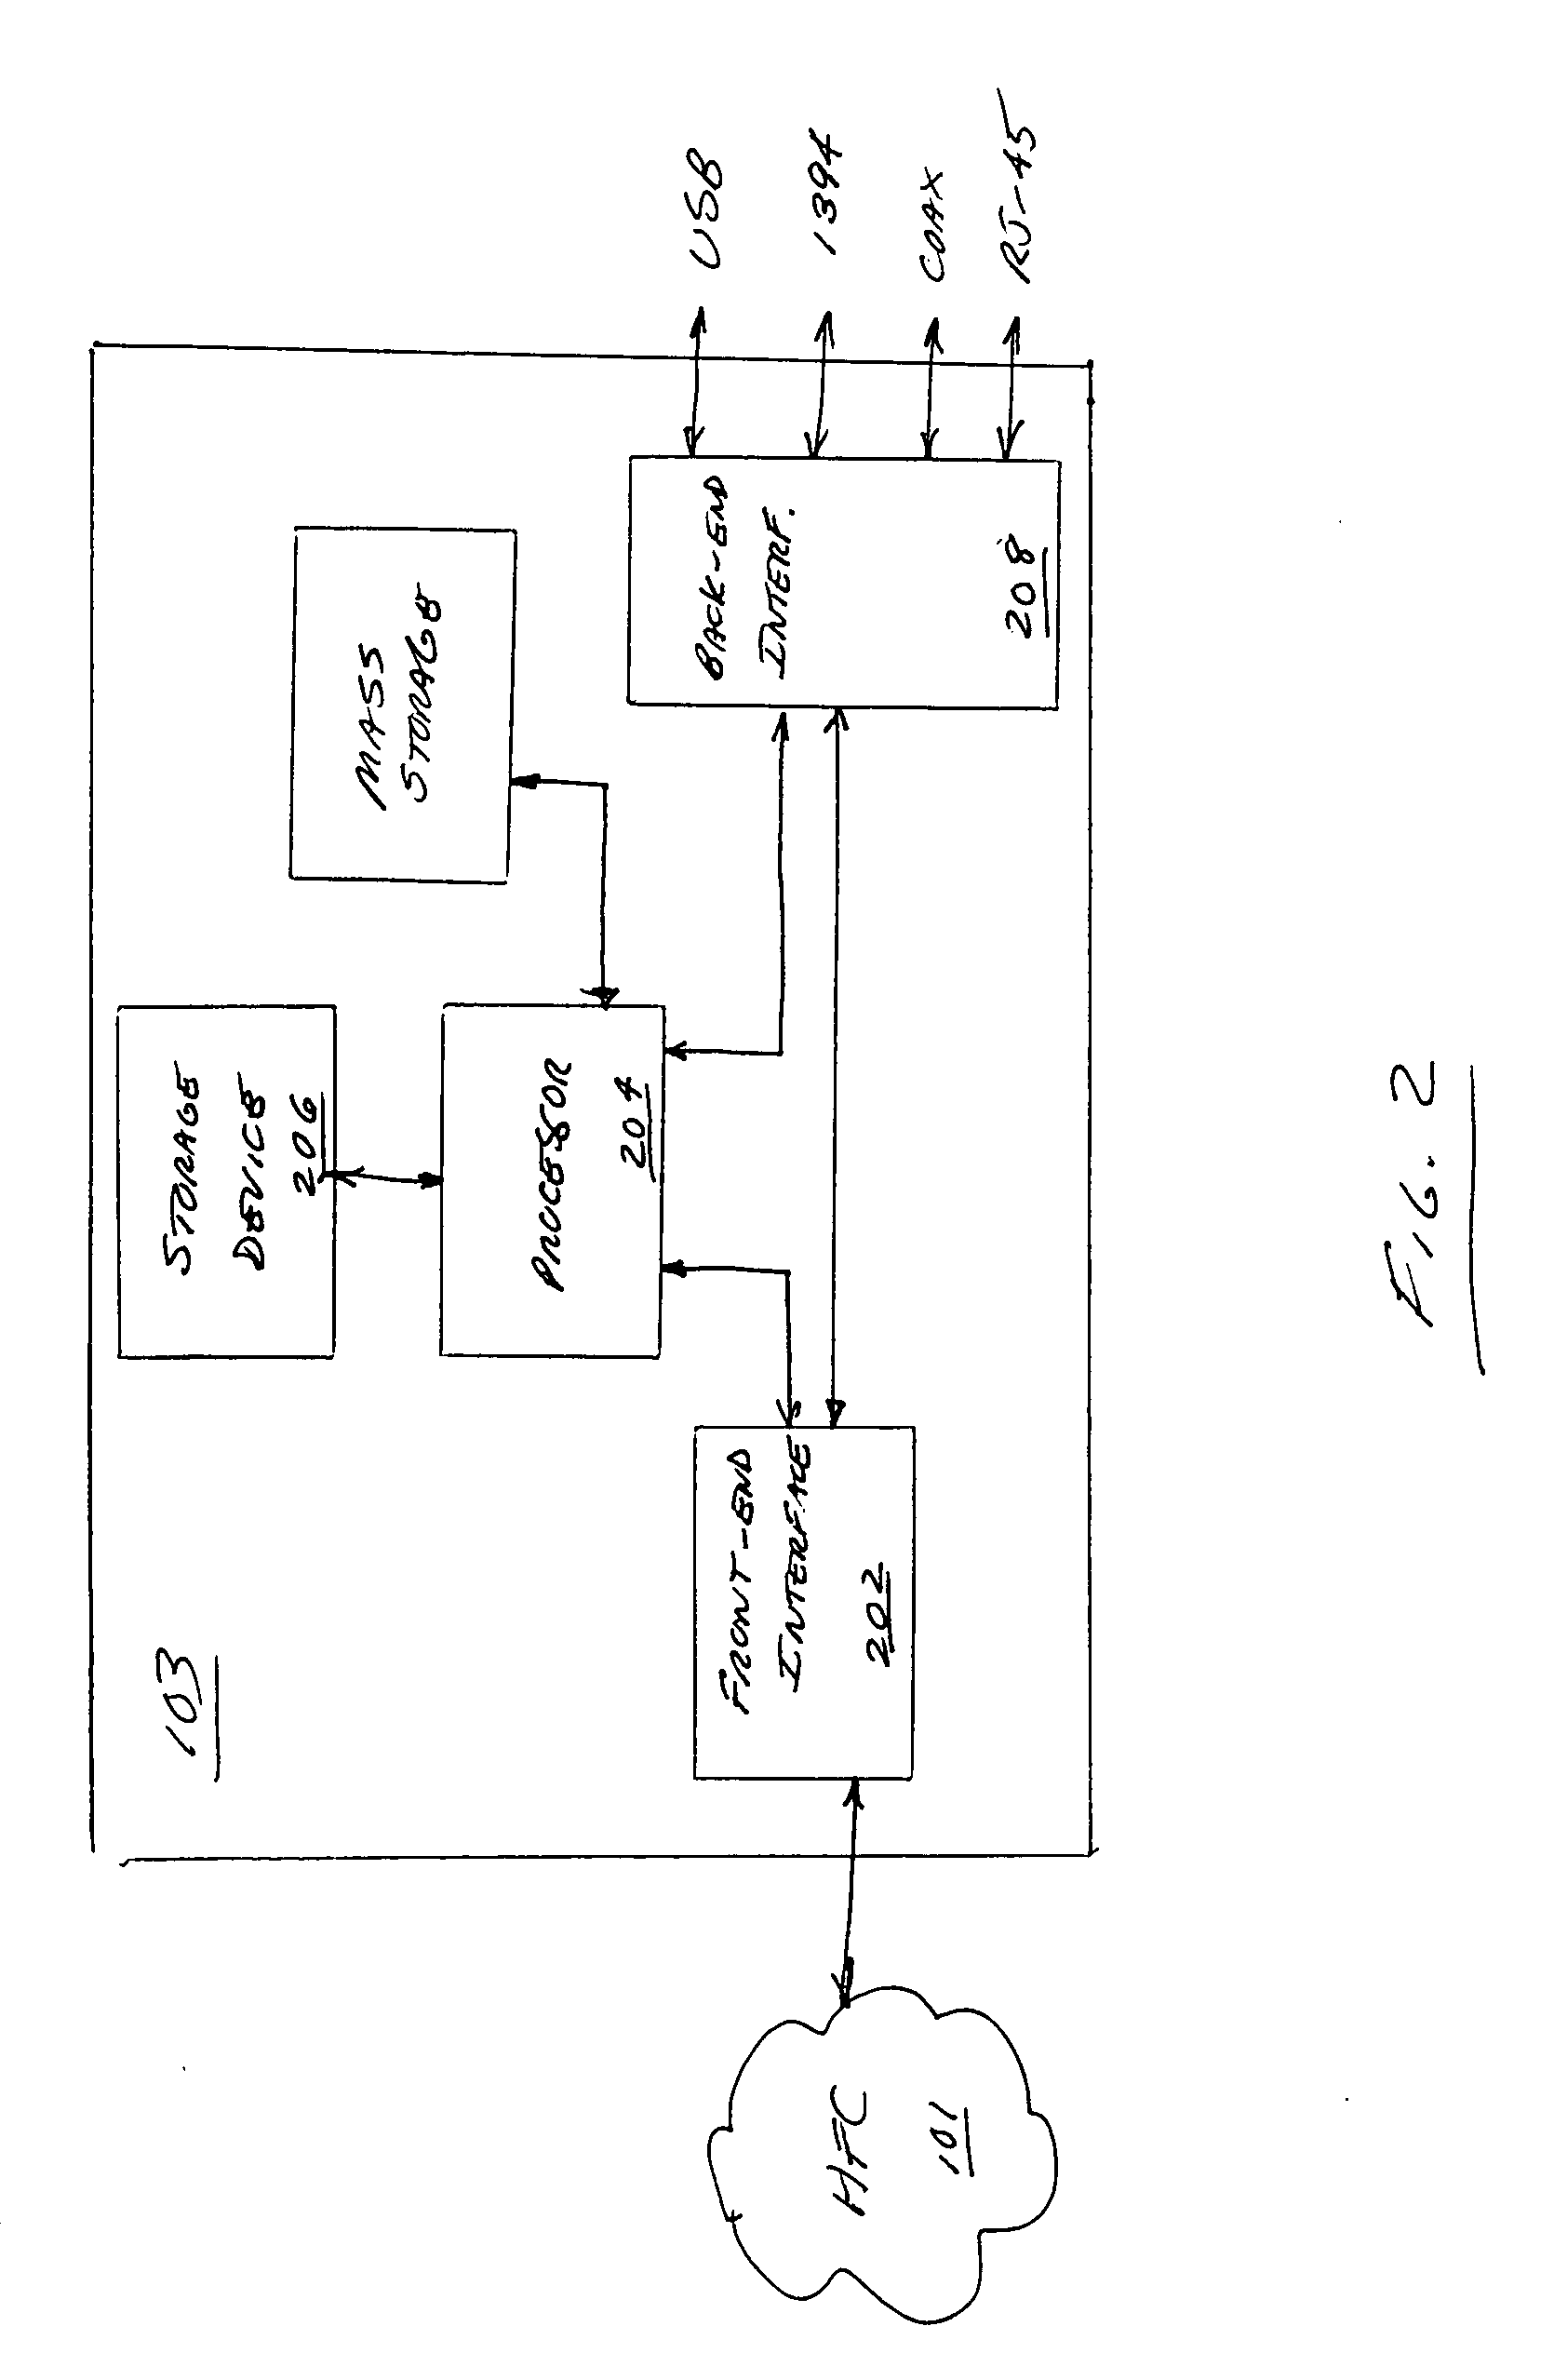 Scheduling trigger apparatus and method